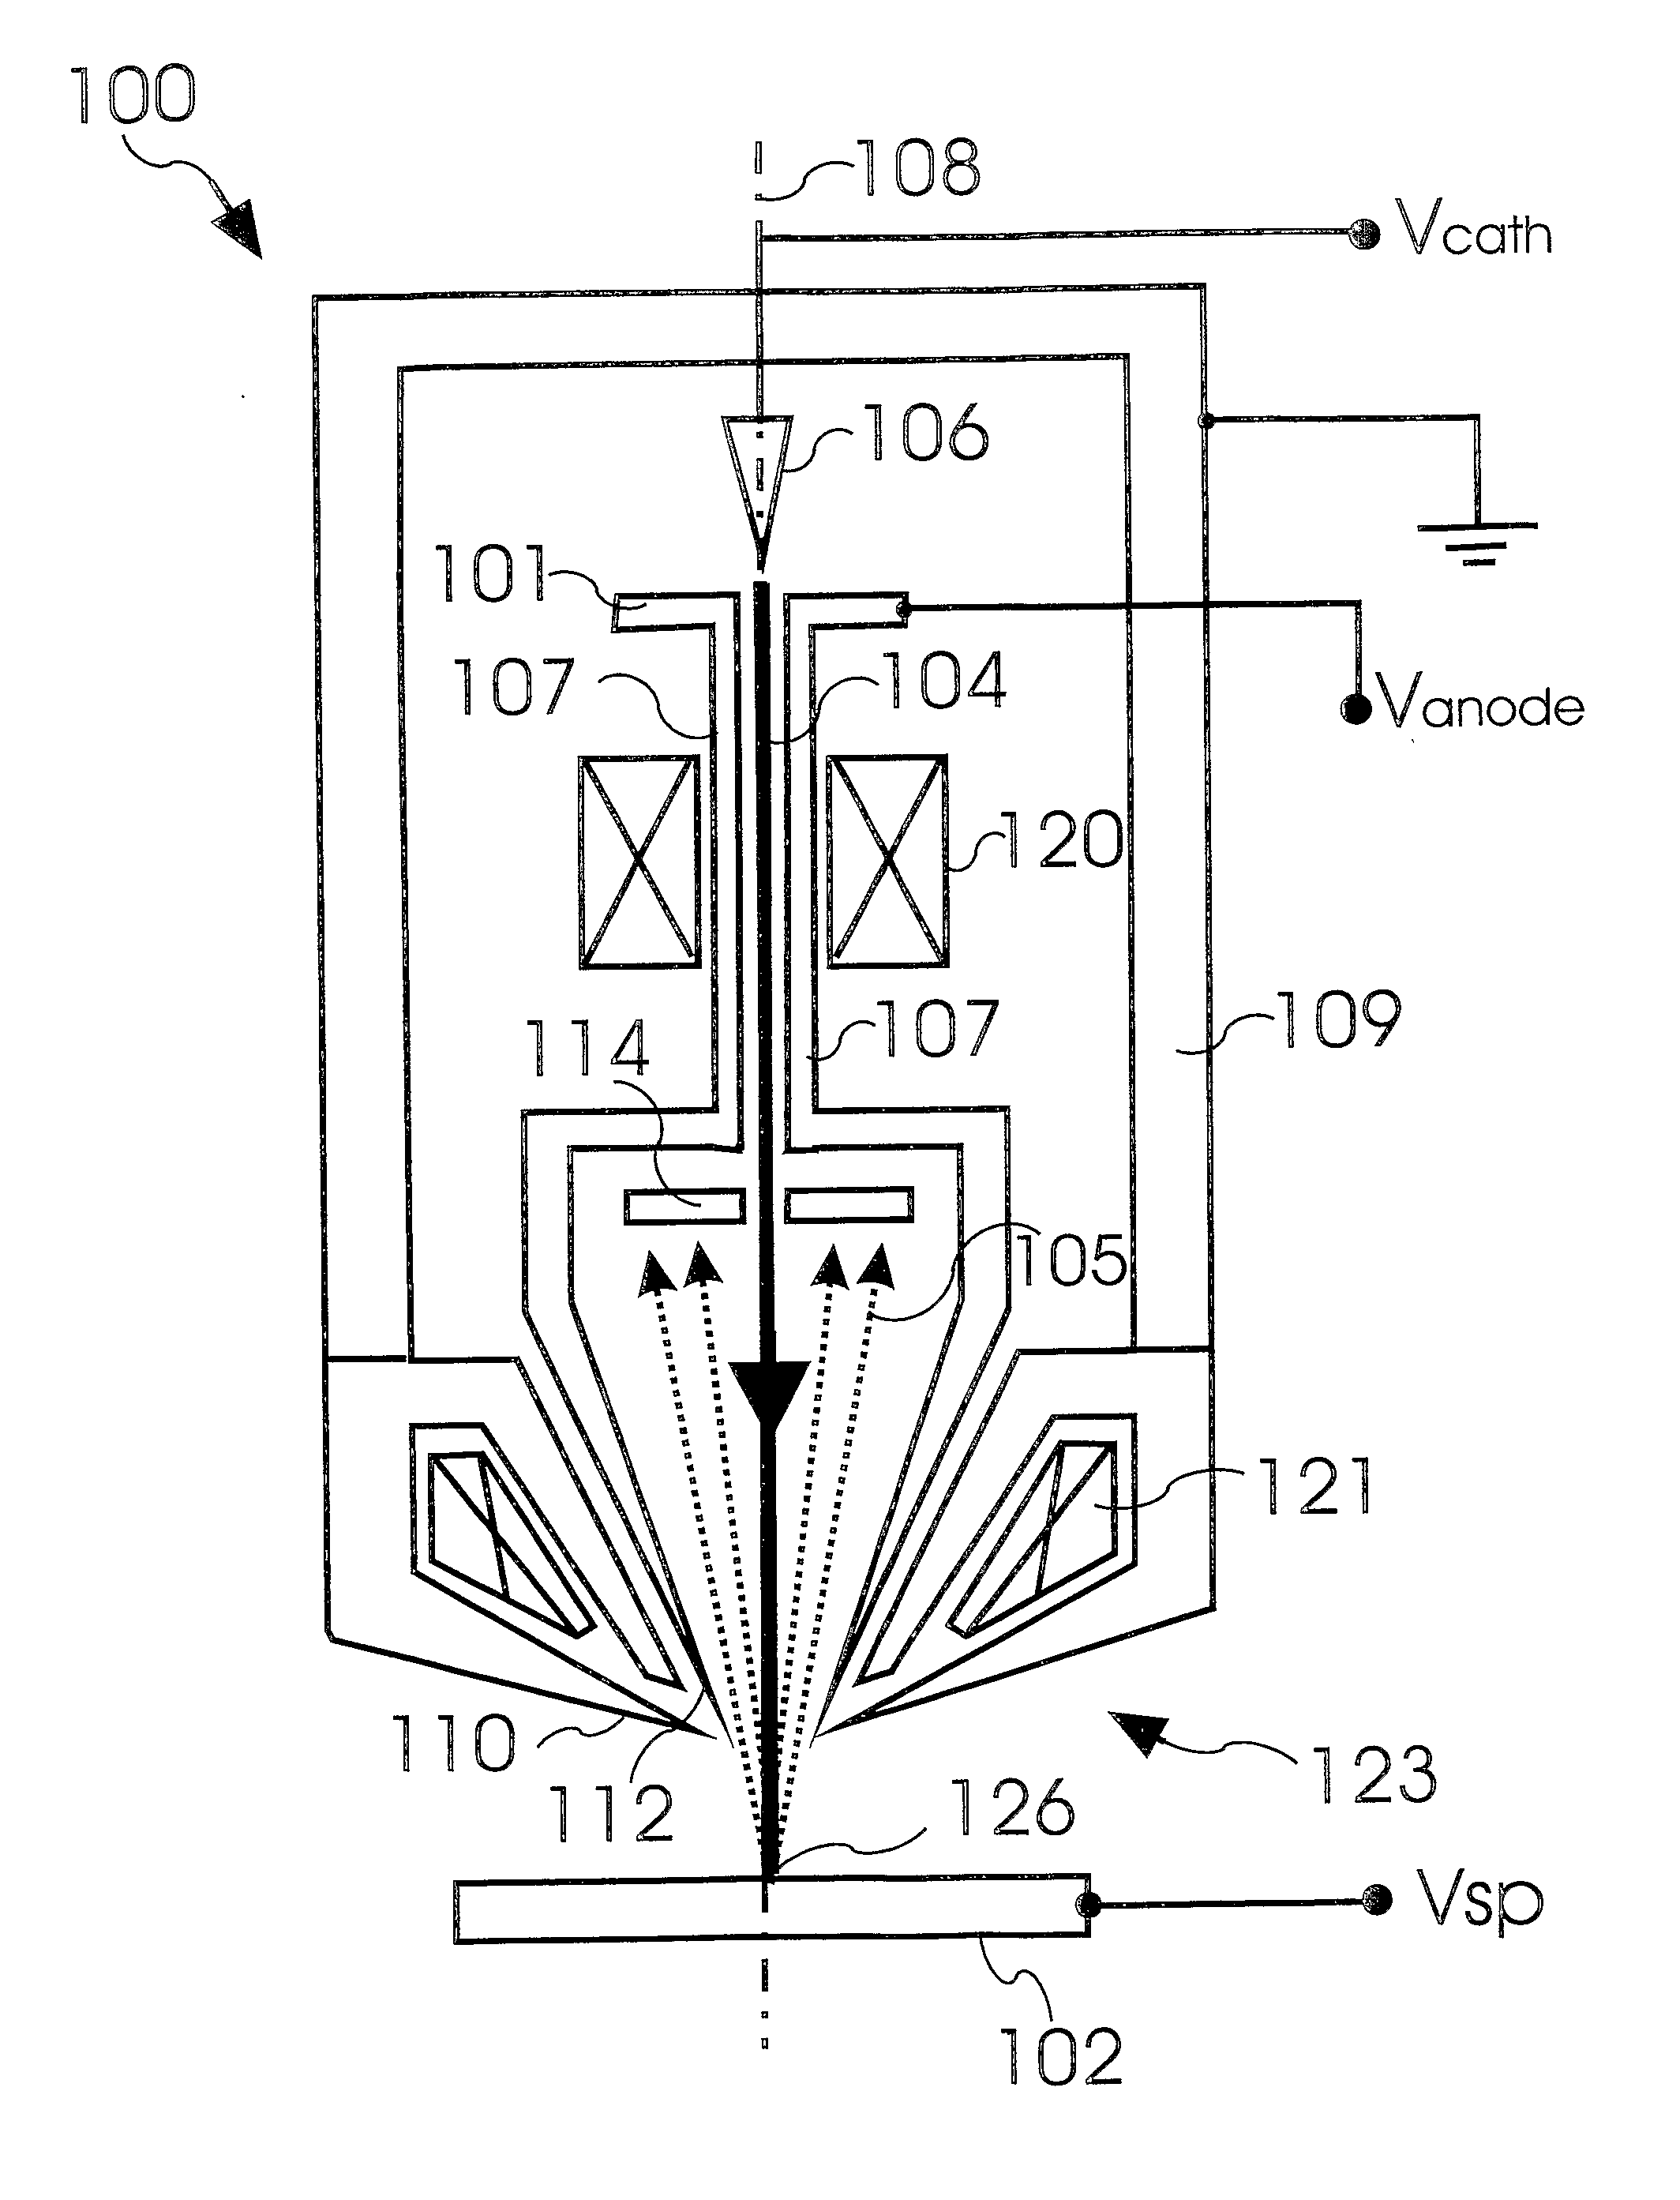 Charged Particle Beam Device With Retarding Field Analyzer